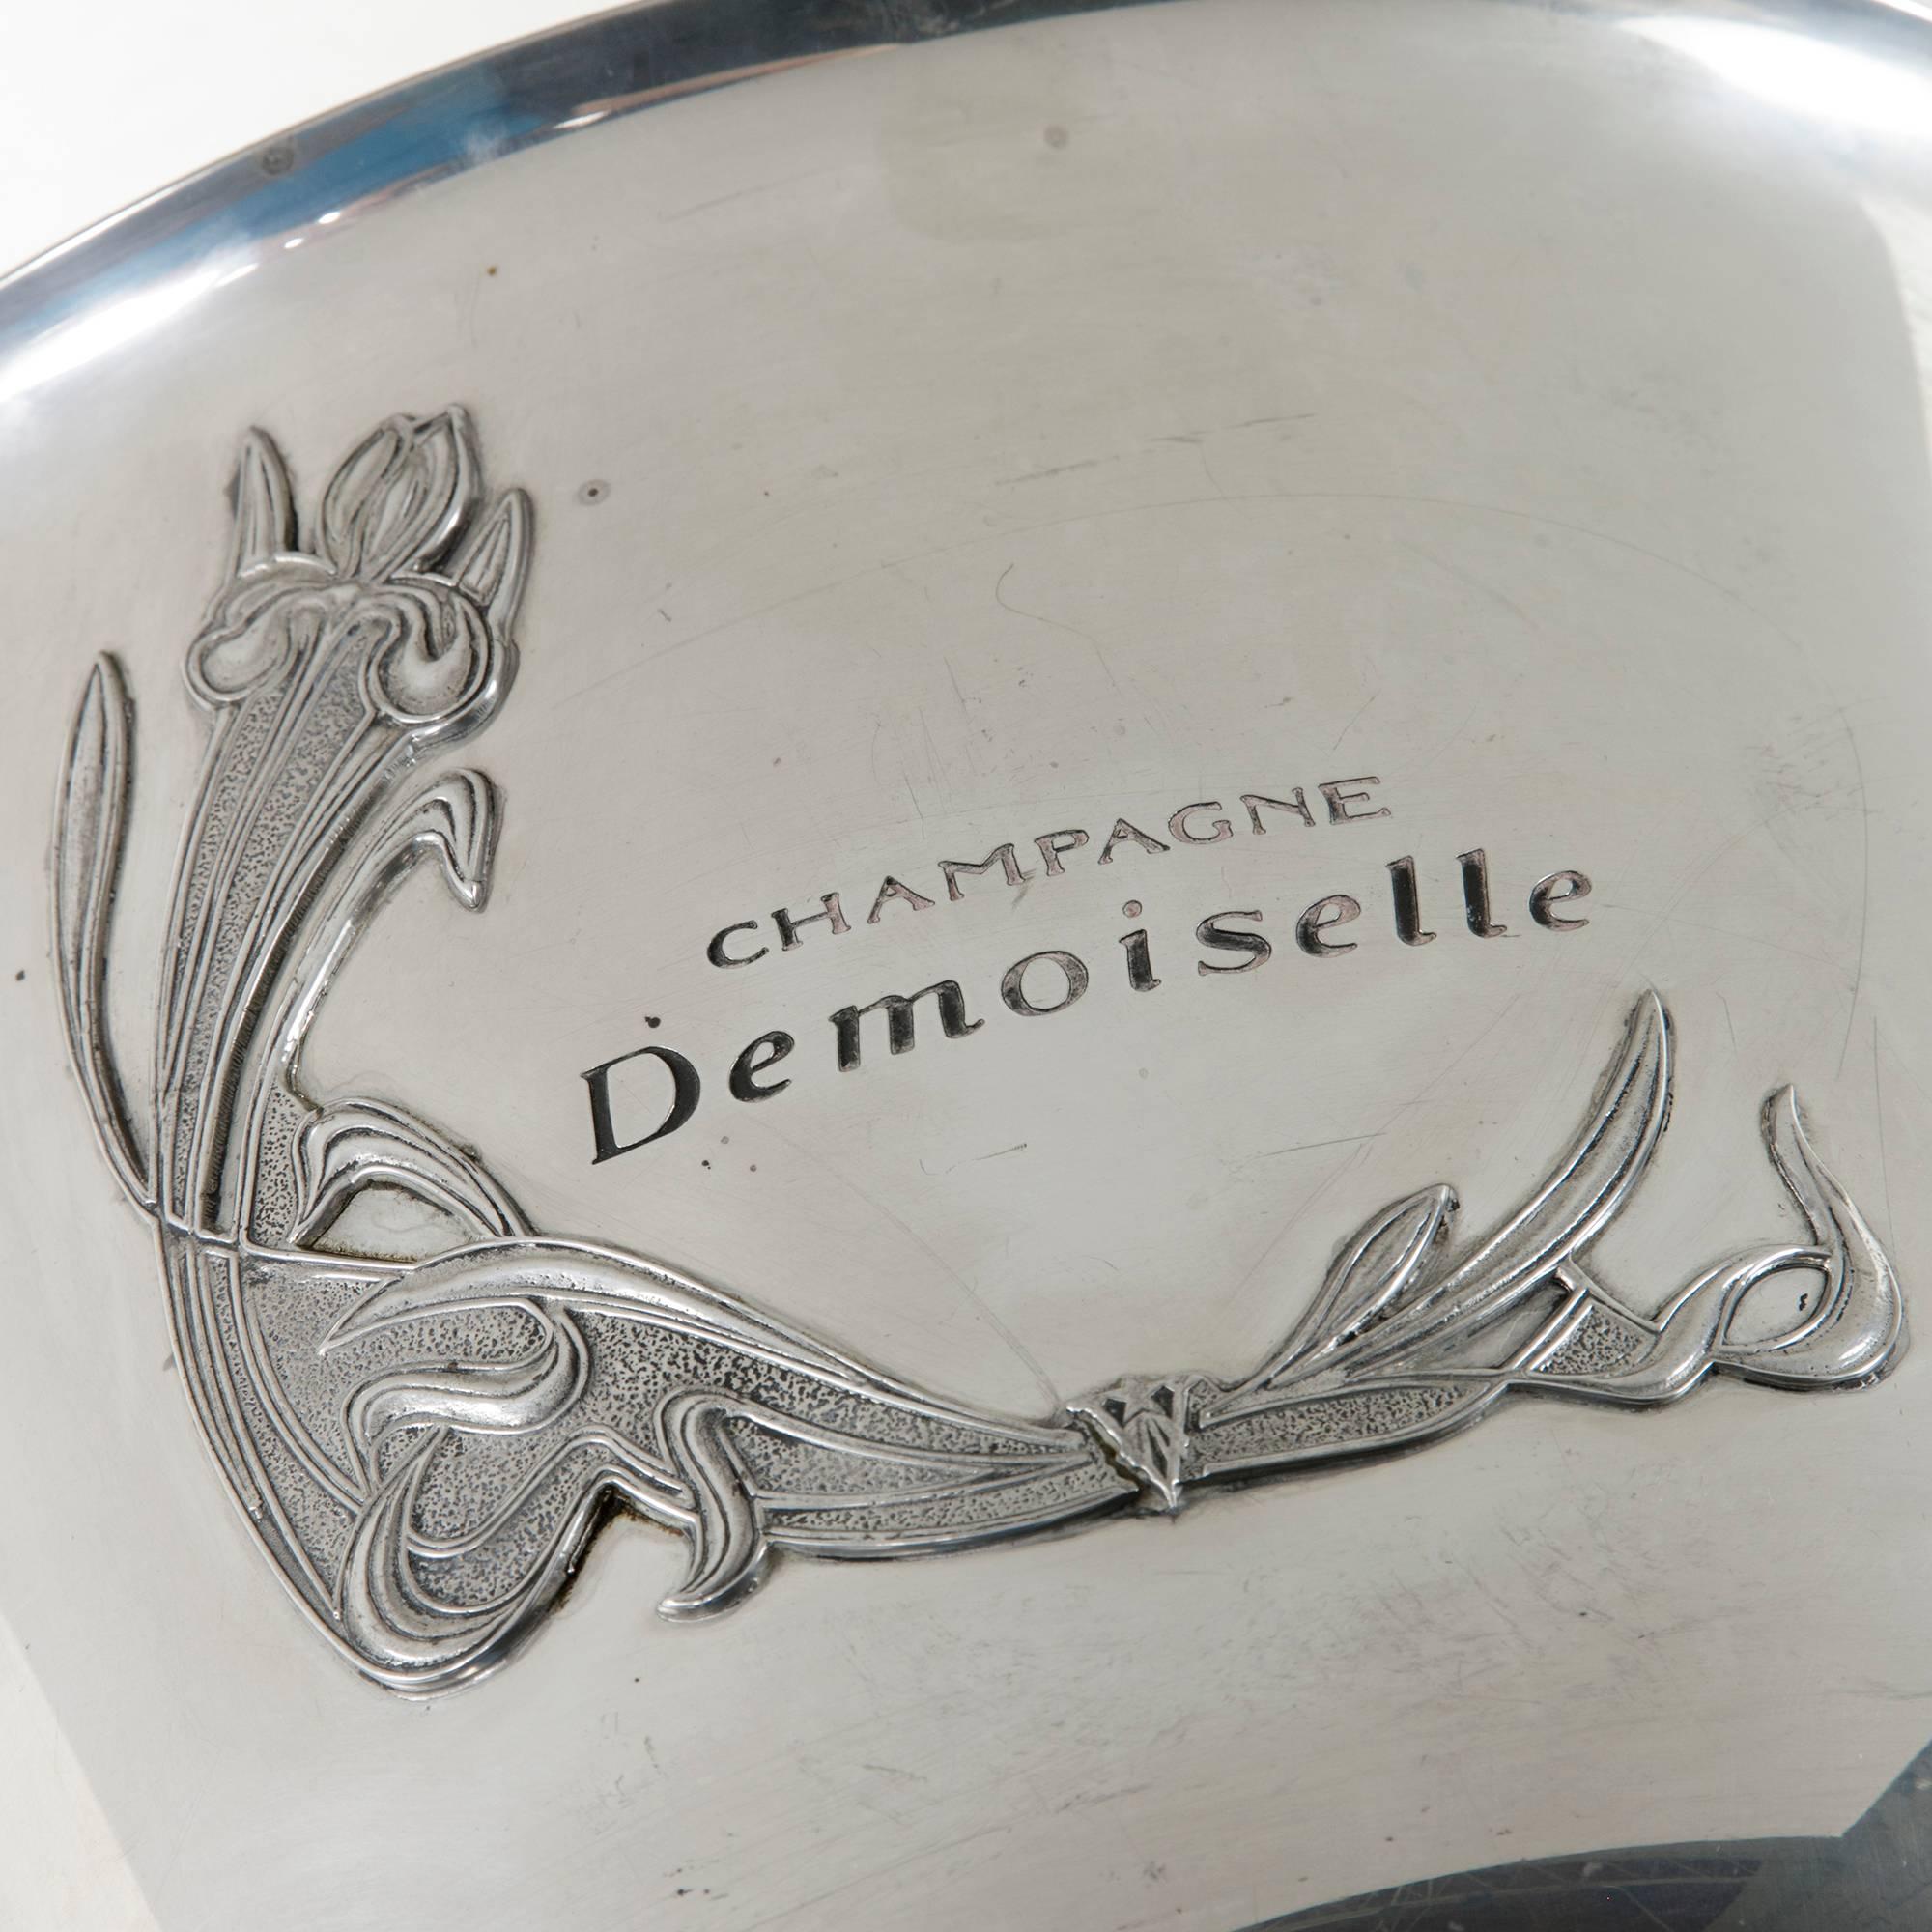 This 20th century silver plate champagne bucket was originally used for hotel service. Bearing the mark of the champagne demoiselle and its art Nouveau motif, this wine chiller holds six bottles. The Demoiselle champagne is named for the vineyards